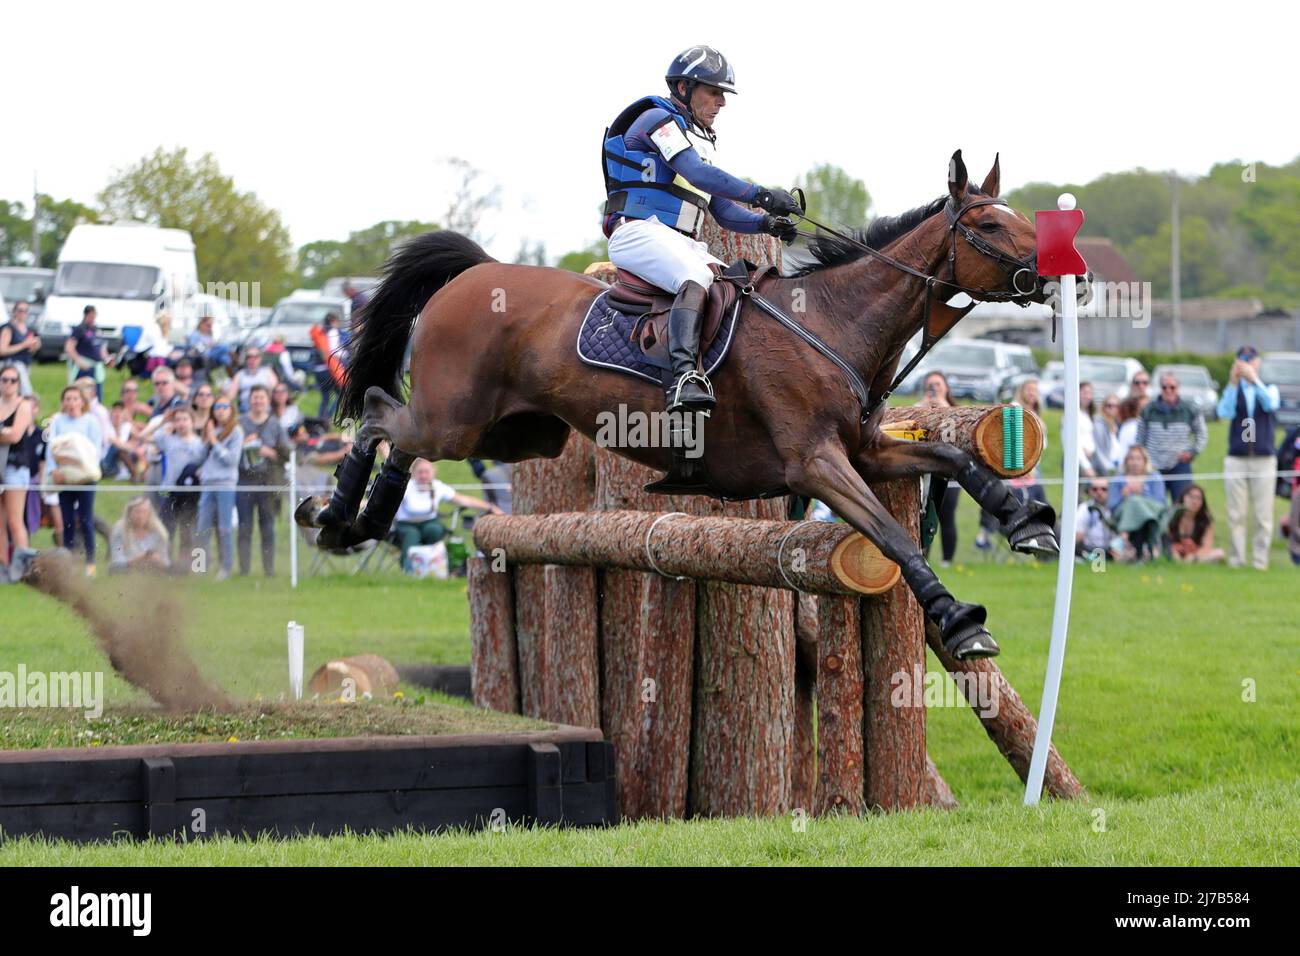 BADMINTON, UK, MAY 7THCedric Lyard riding Unum deÕOr during the Cross Country Event at Badminton Horse Trials, Badminton House, Badminton on Saturday 7th May 2022